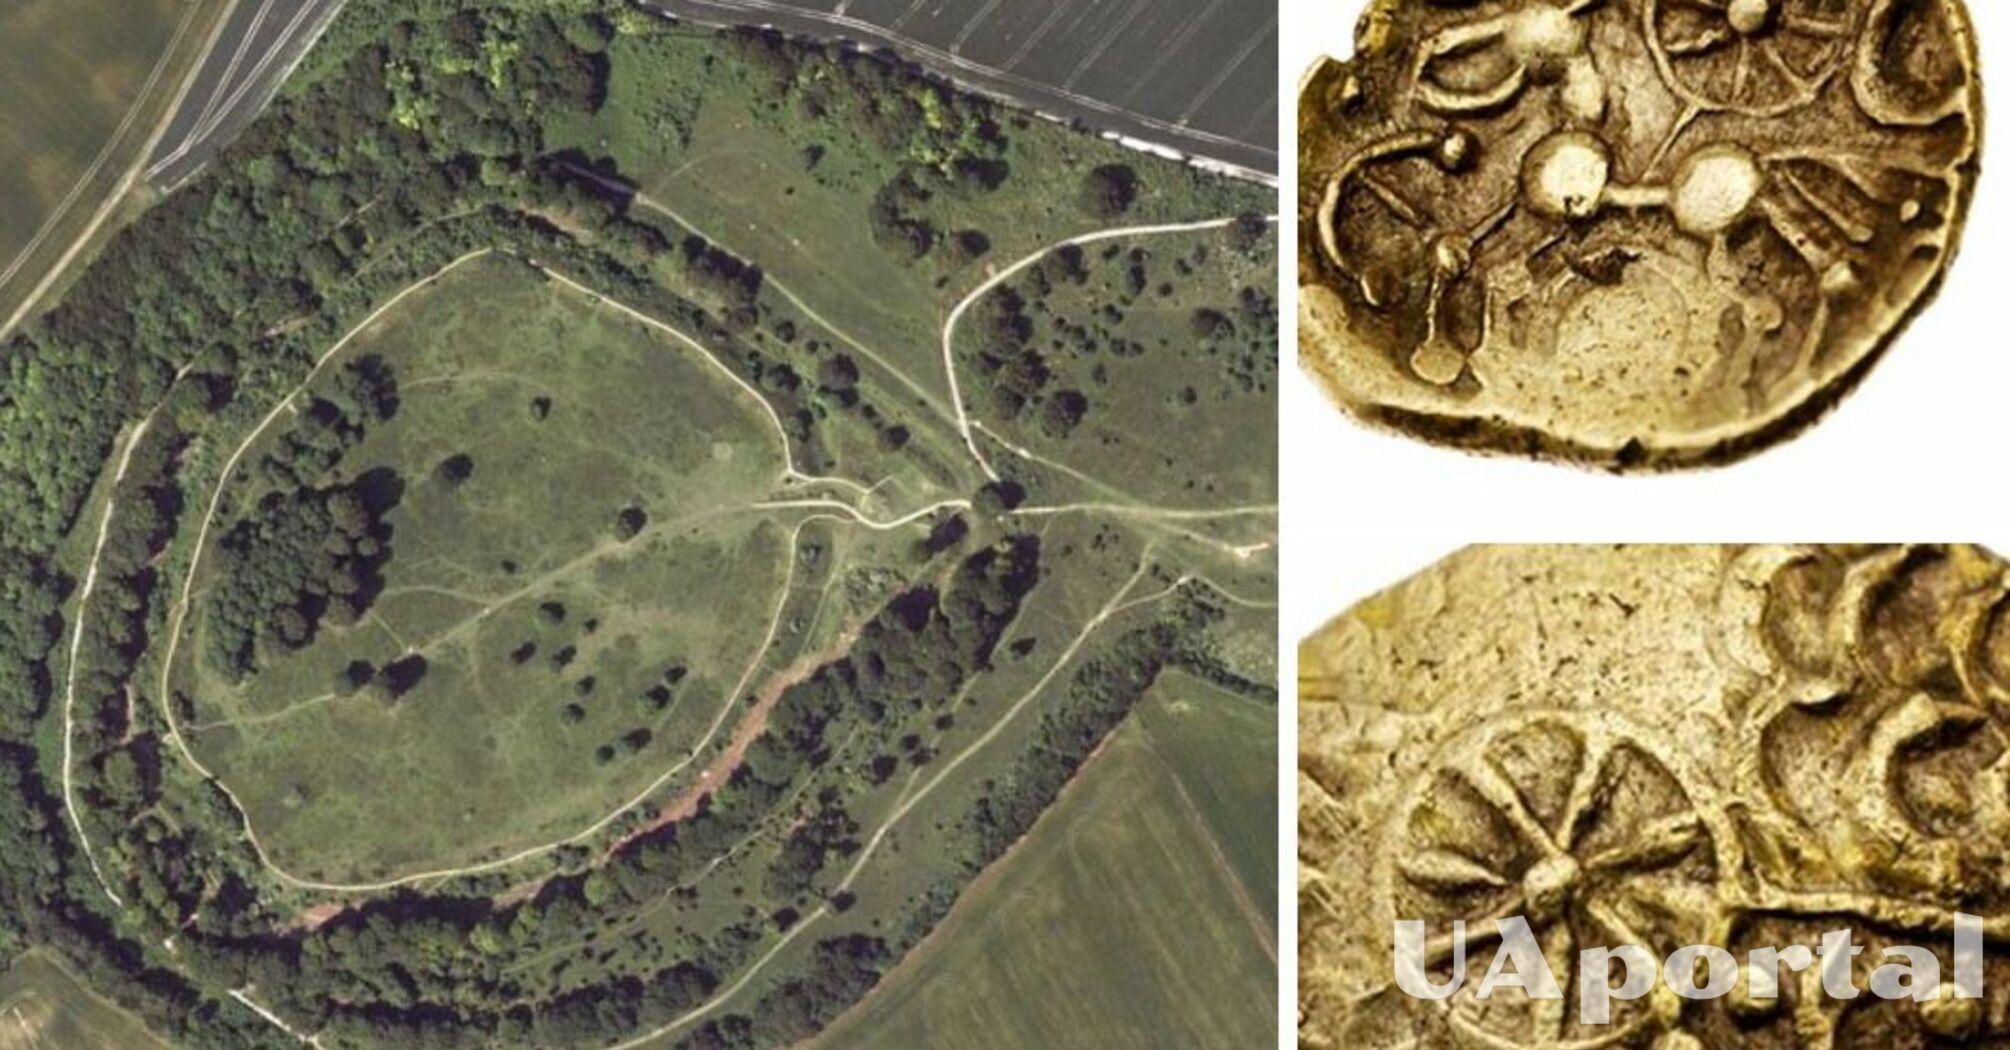 A metal detector makes an extraordinary discovery that rewrites the history of ancient Britain (photo)